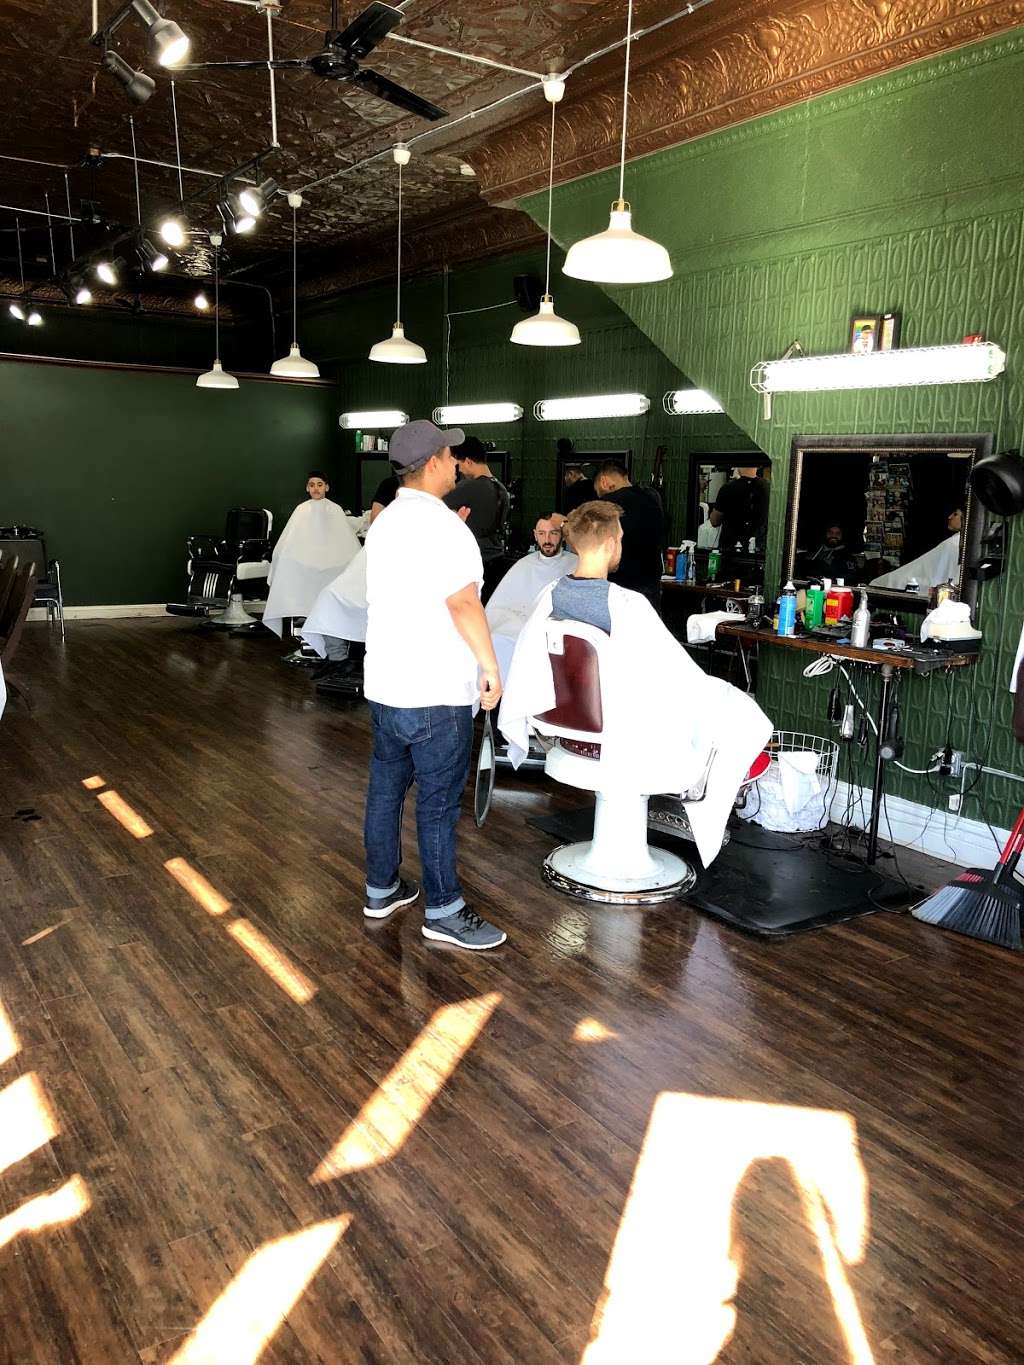 Barkers Barbershop | 818 W 18th St, Chicago, IL 60608 | Phone: (312) 846-6197